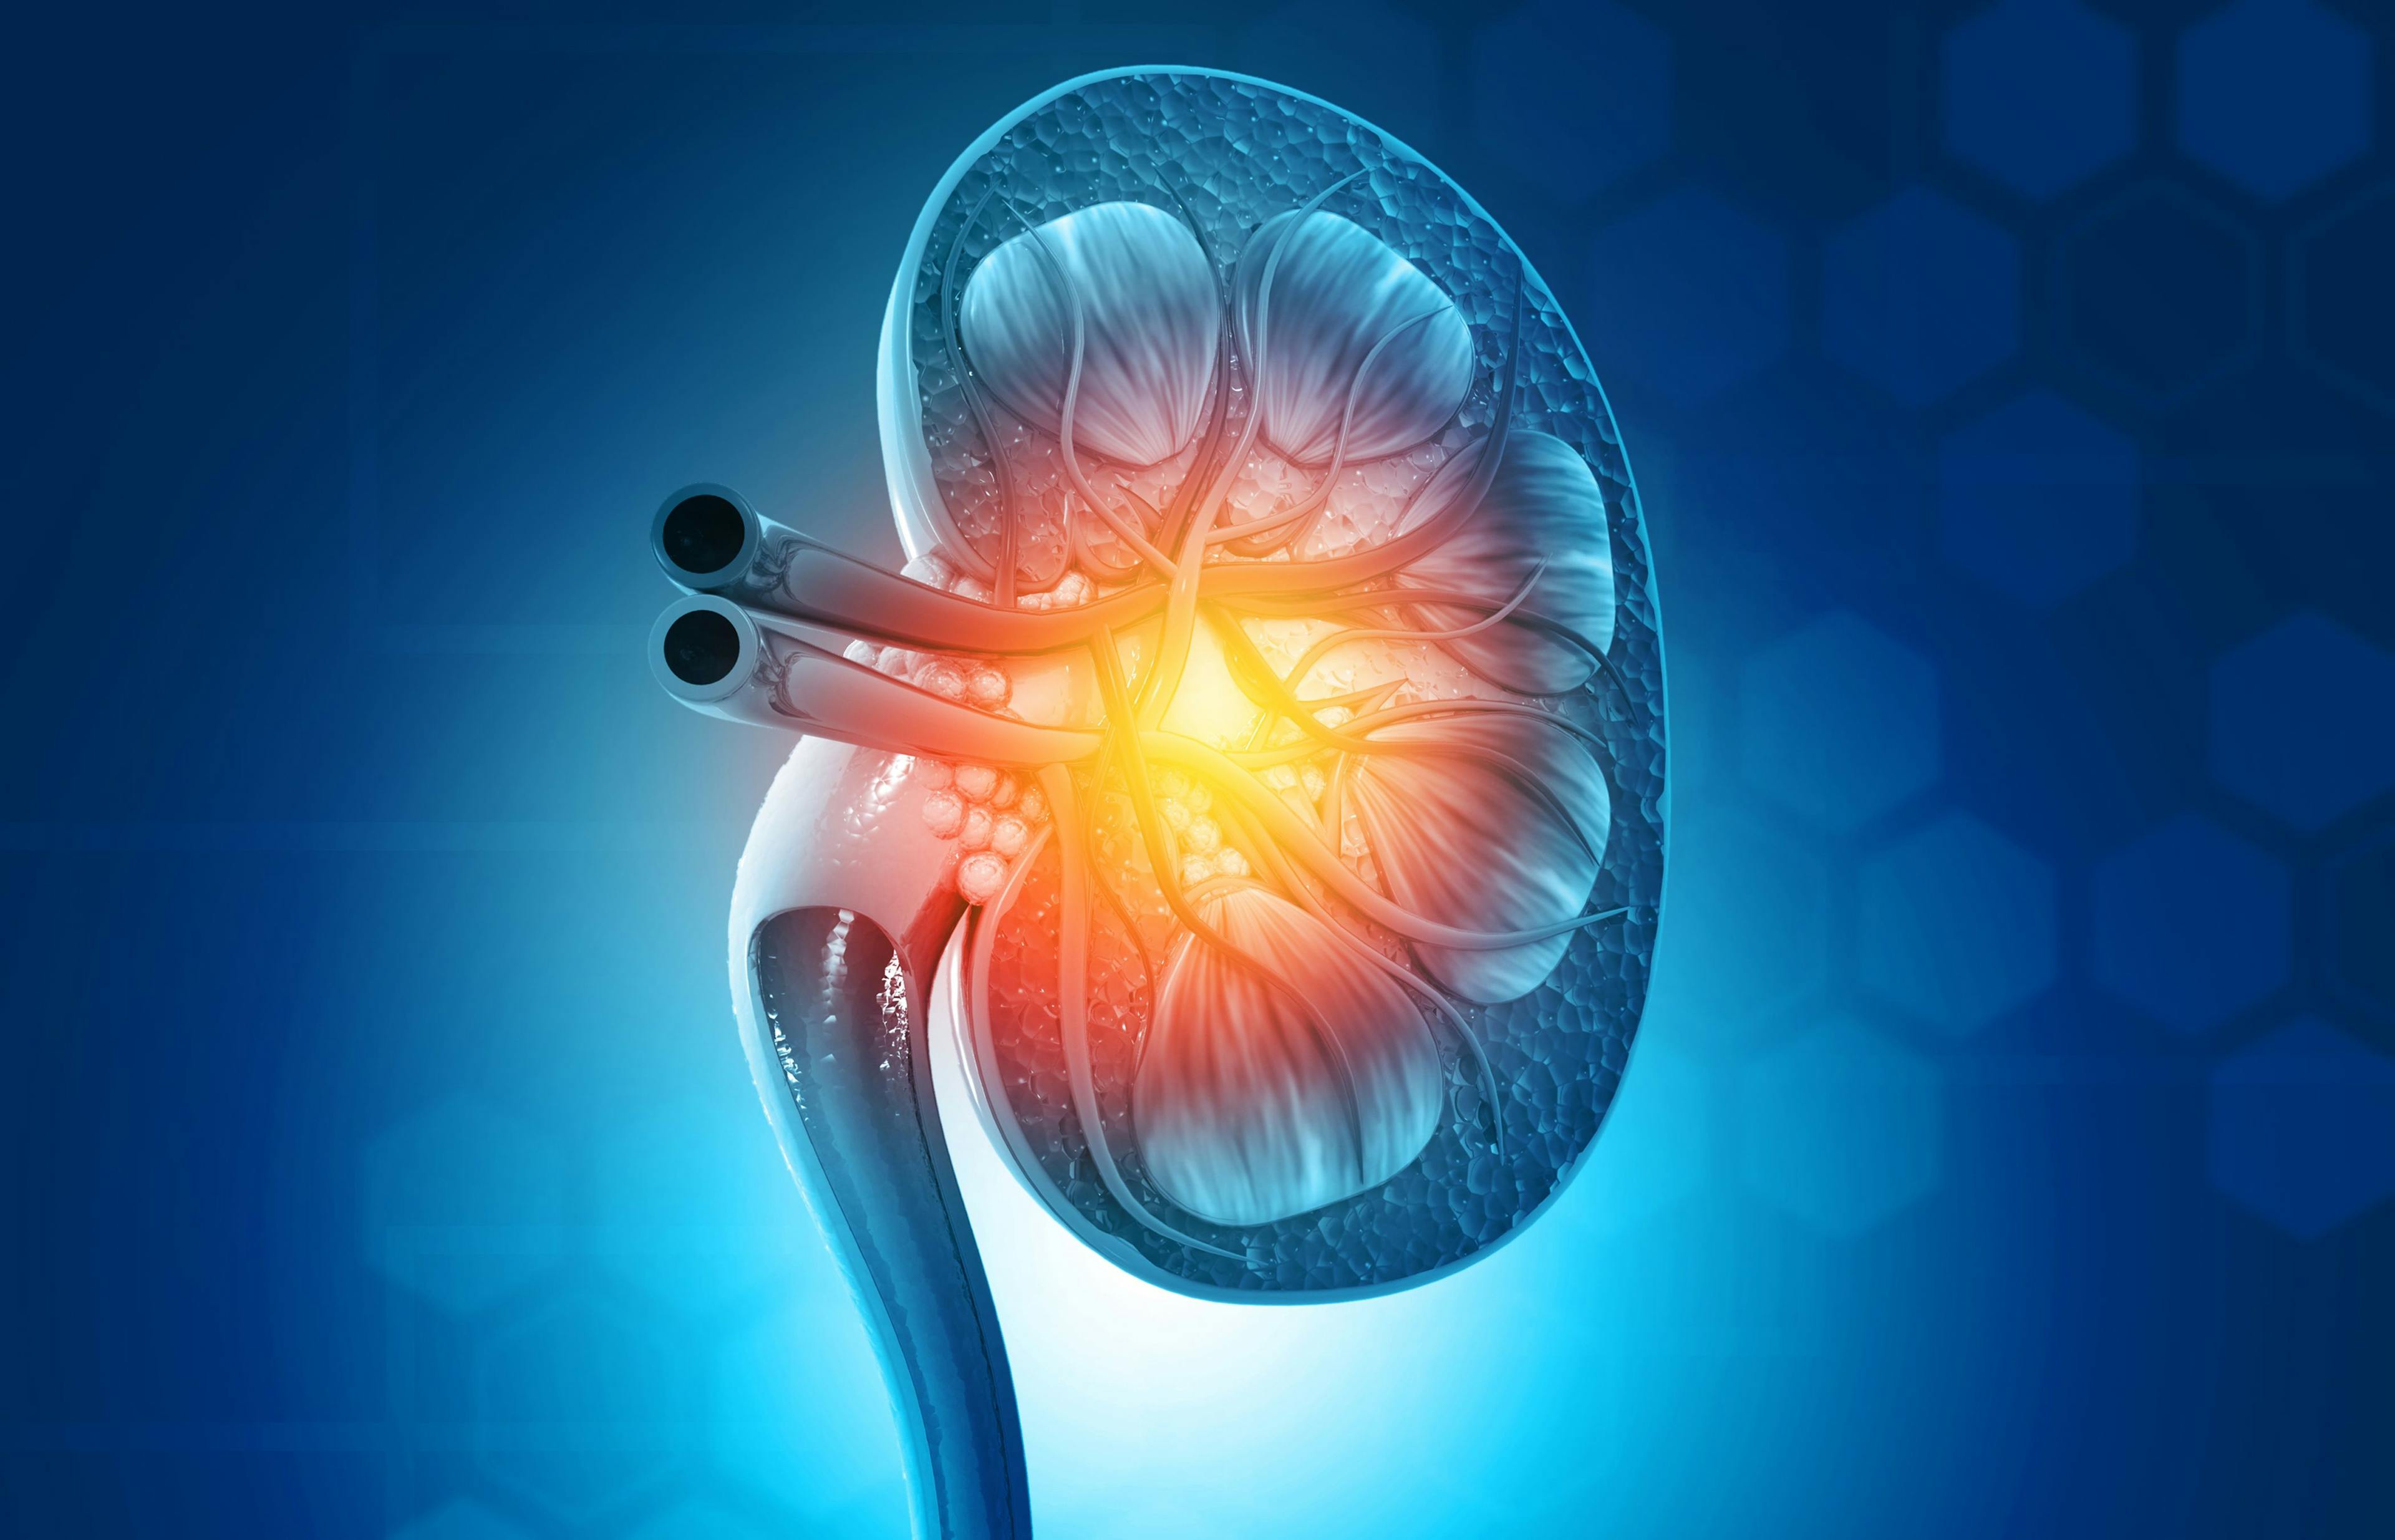 Lupus Nephritis CAR-T Therapy Cleared for Phase 1/2 Clinical Trial 